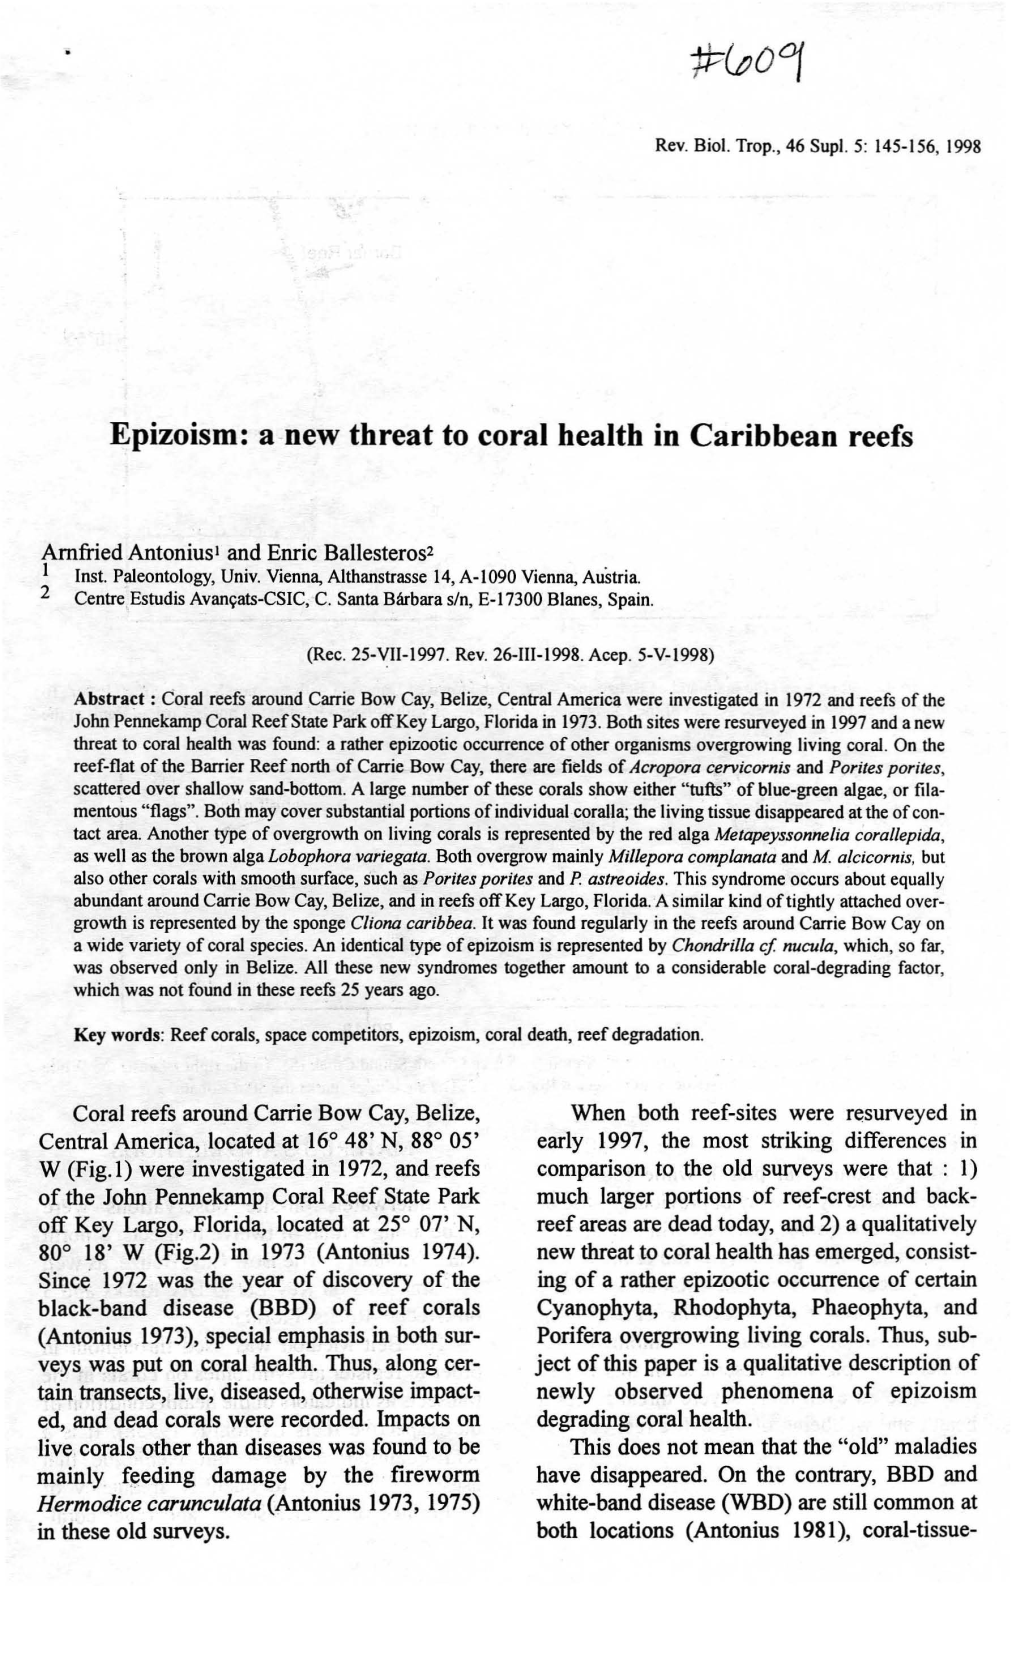 A New Threat to Coral Health in Caribbean Reefs